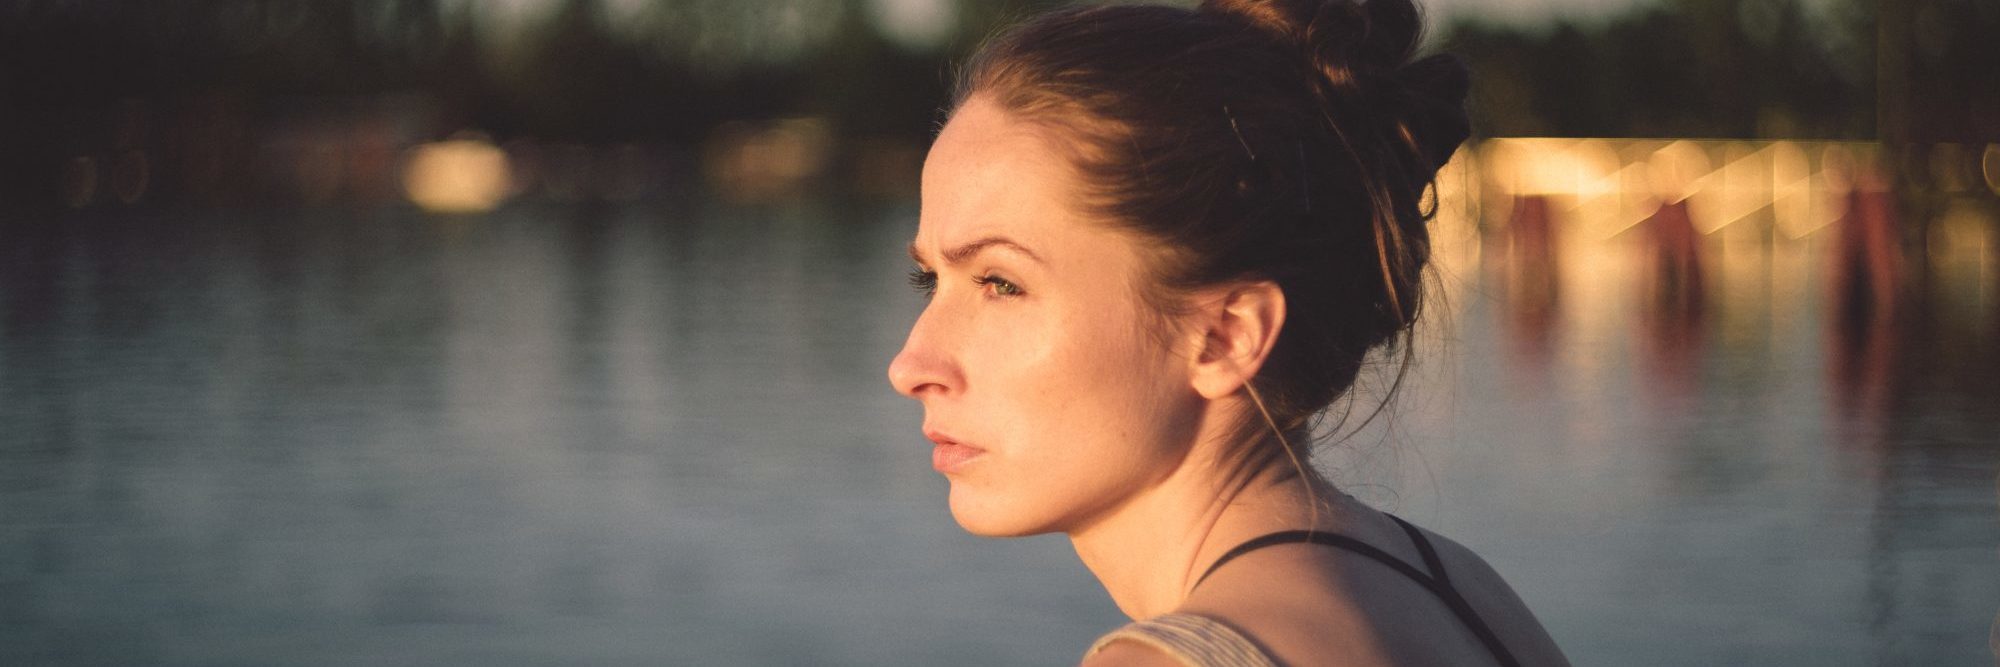 young woman in sunset by water staring out thoughtfully